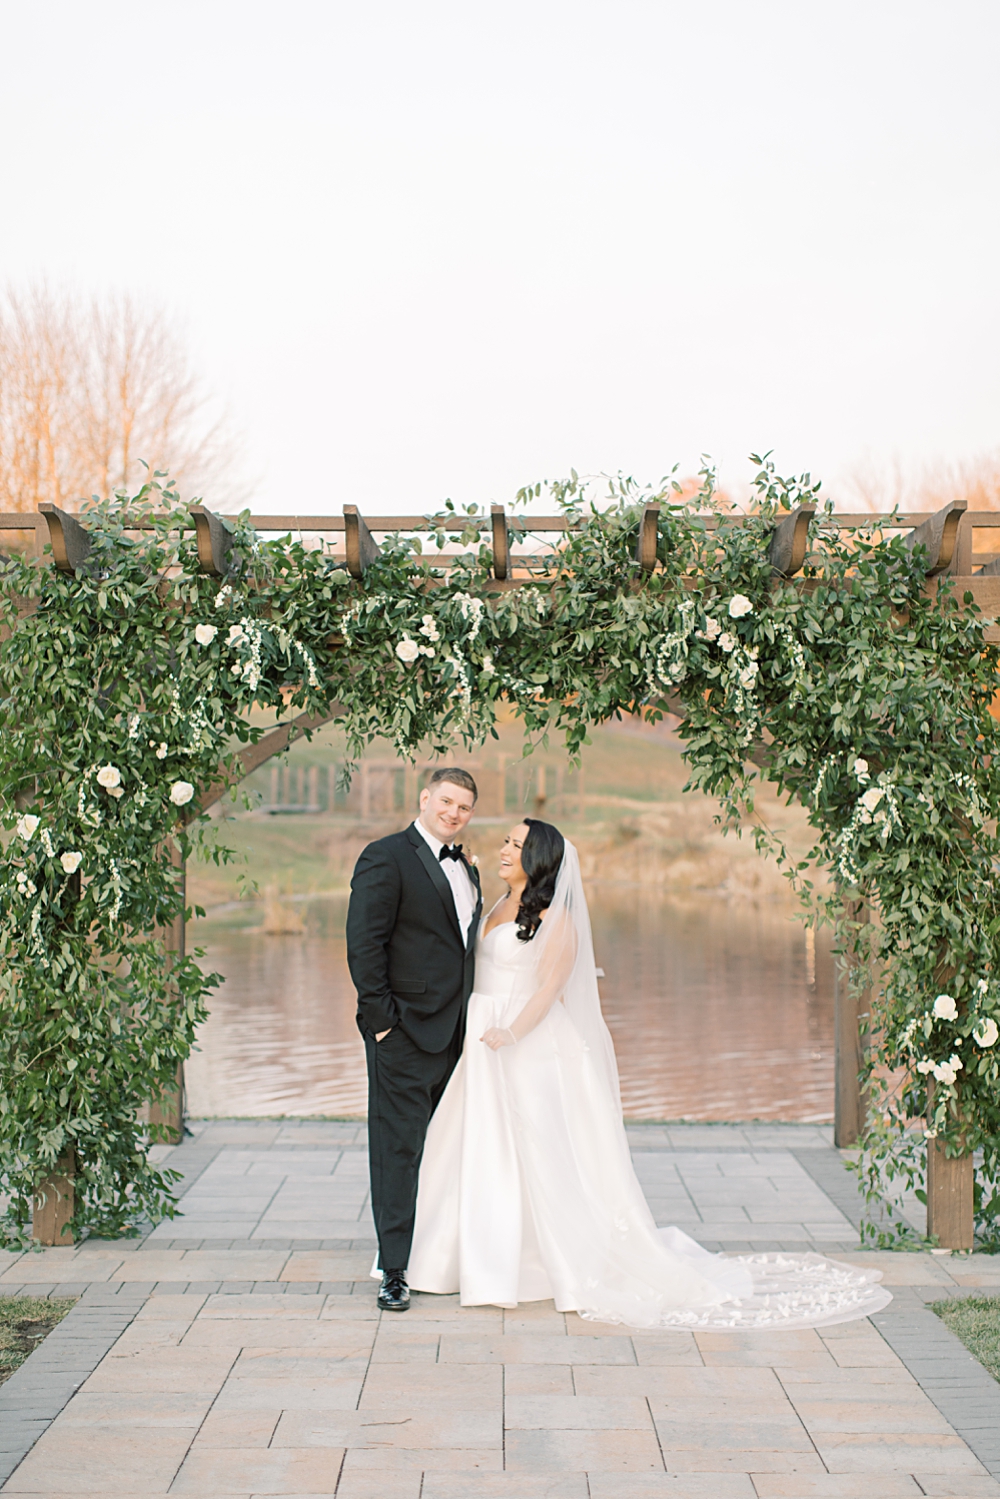 greenery wedding ceremony arch | from peonies to paint chips | sarah canning photography